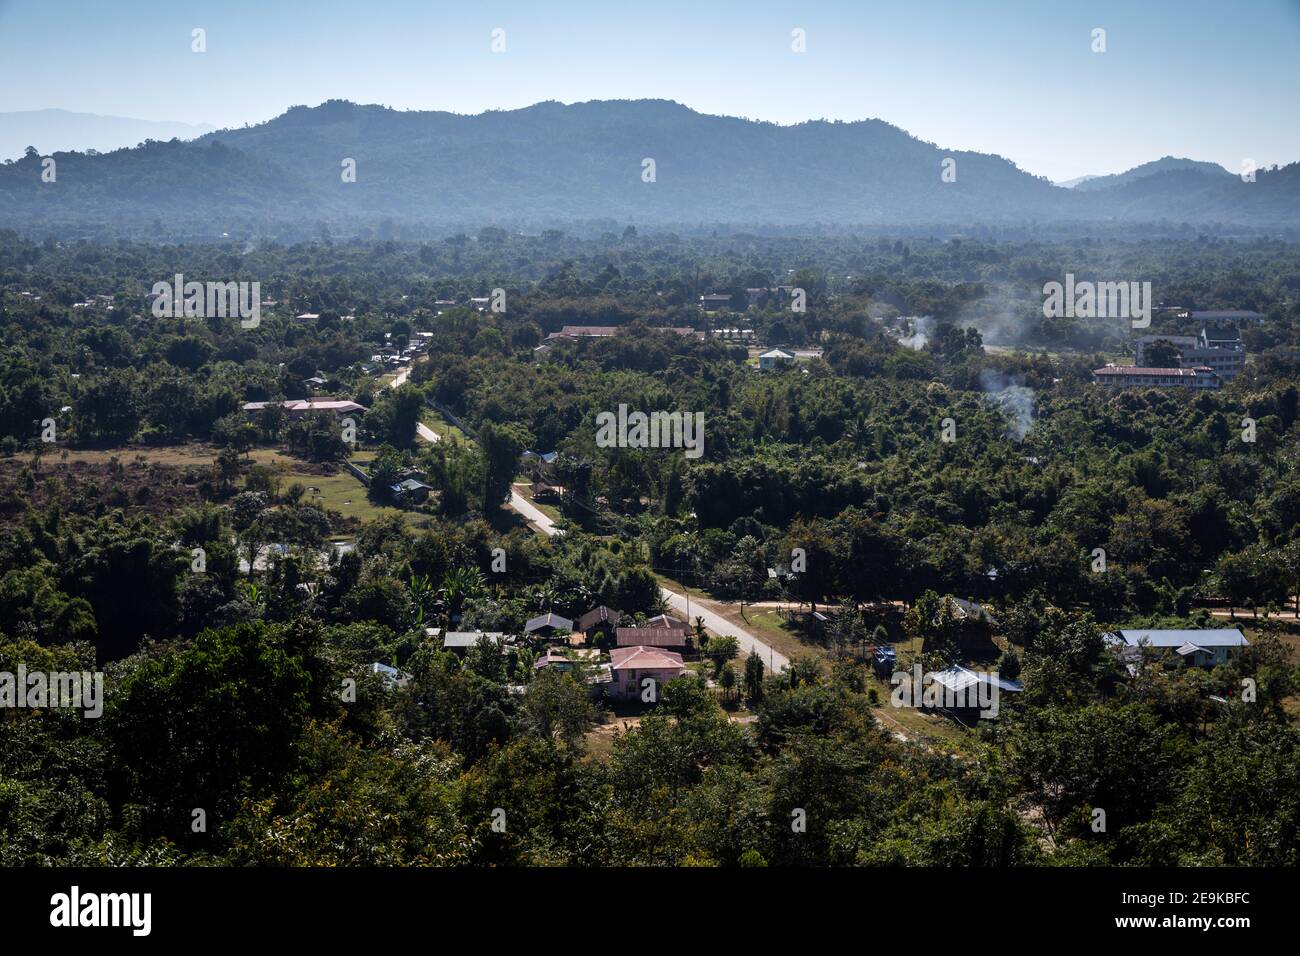 Landscapes and villages around Myikyina in northern Myanmar, where refugees have been living in IDP refugee camps for many years. Stock Photo